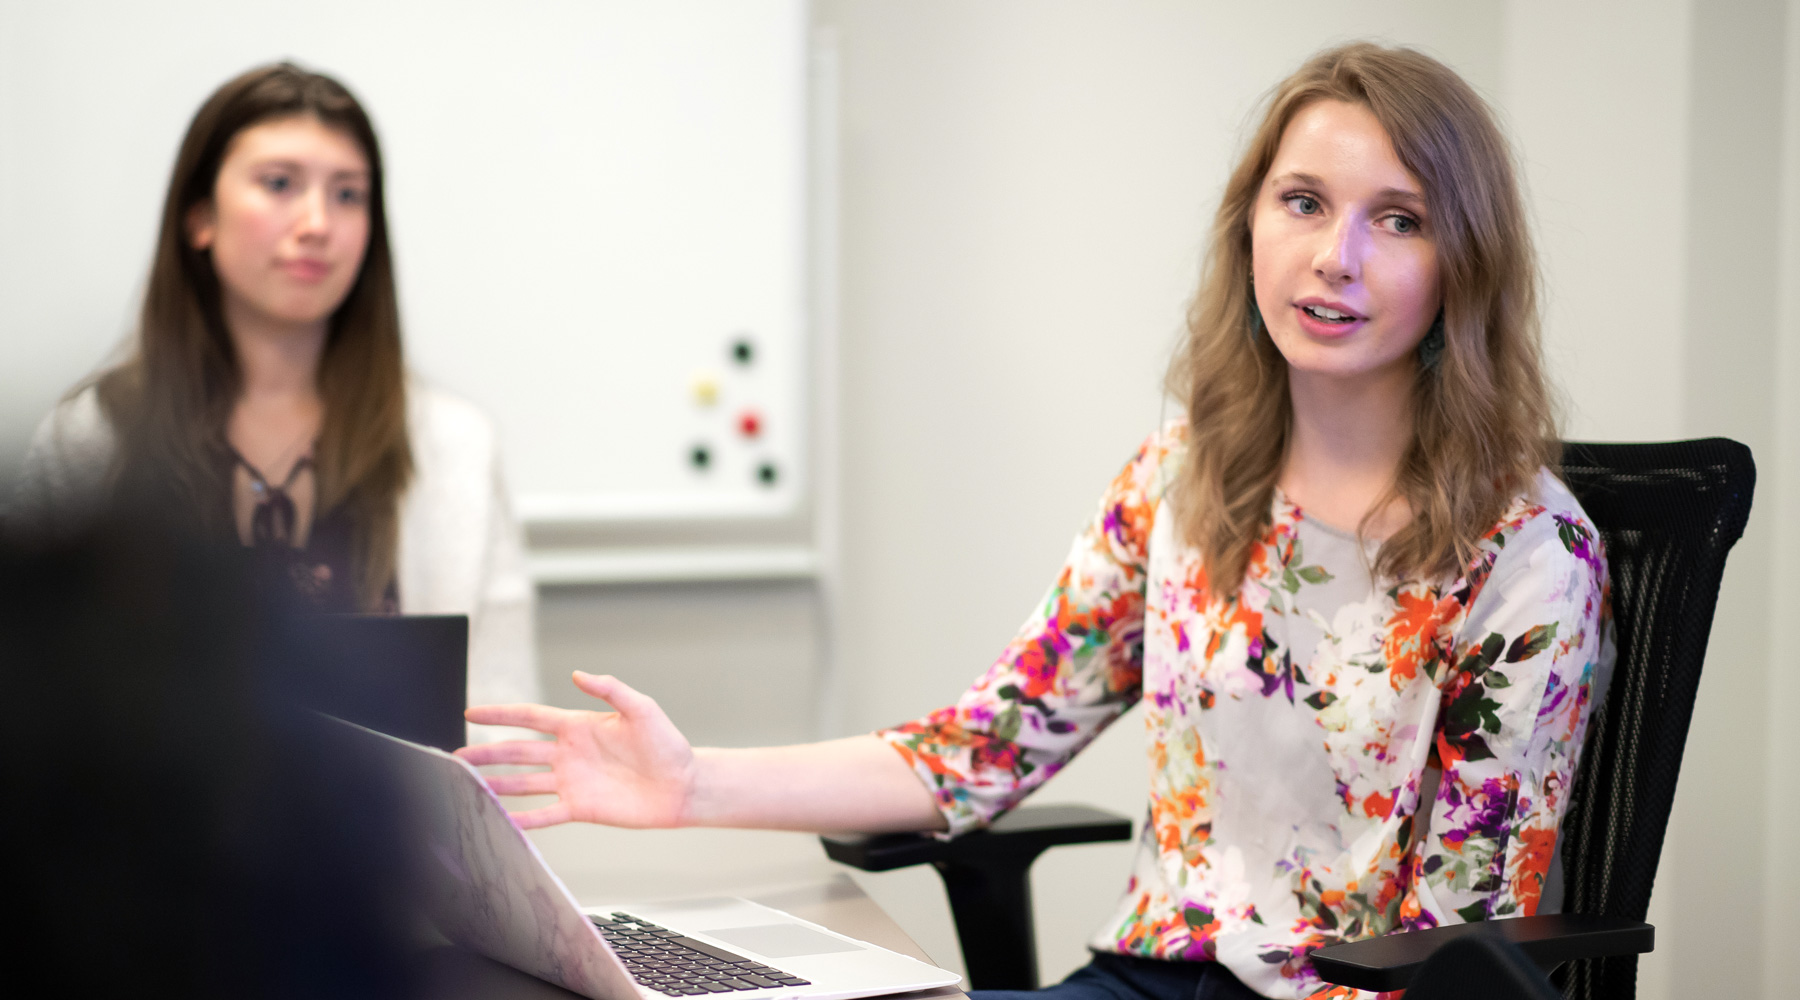 President's Medallion winner Emily Robertson participates in a leadership meeting at Inigo, a student-run marketing agency at Loyola University Chicago. (Photo: Lukas Keapproth)